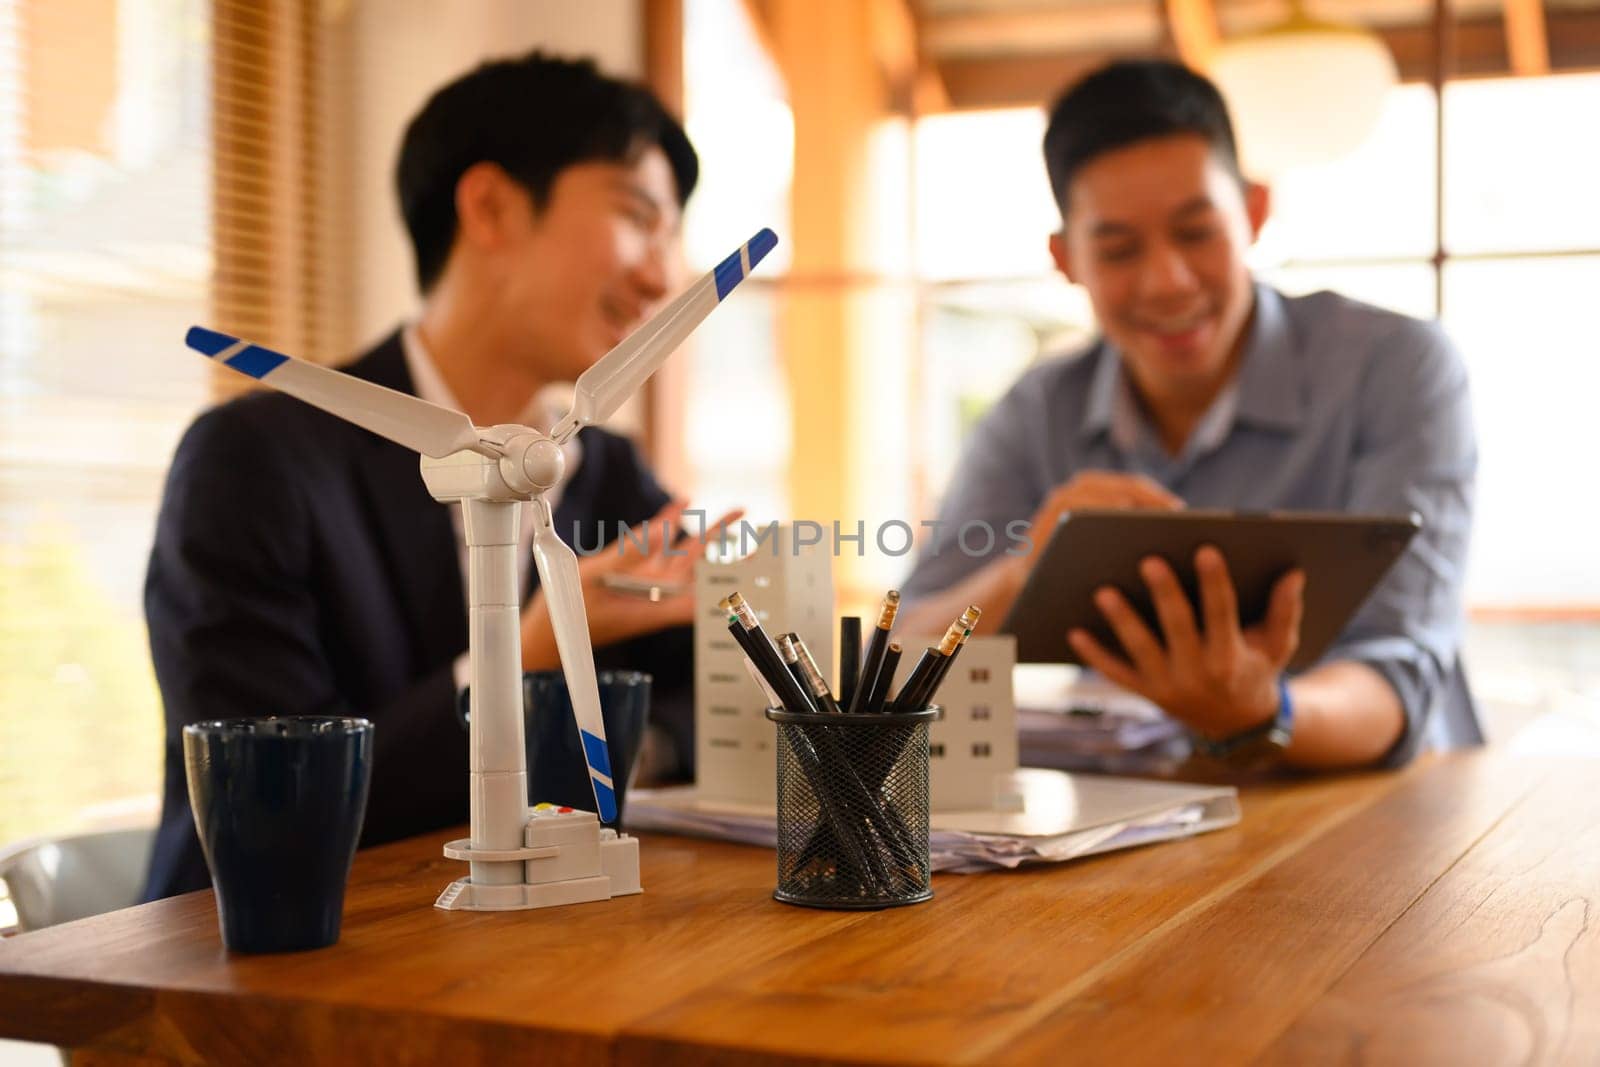 A wind turbine model on table with two businessman working in background. Alternative energy concept.